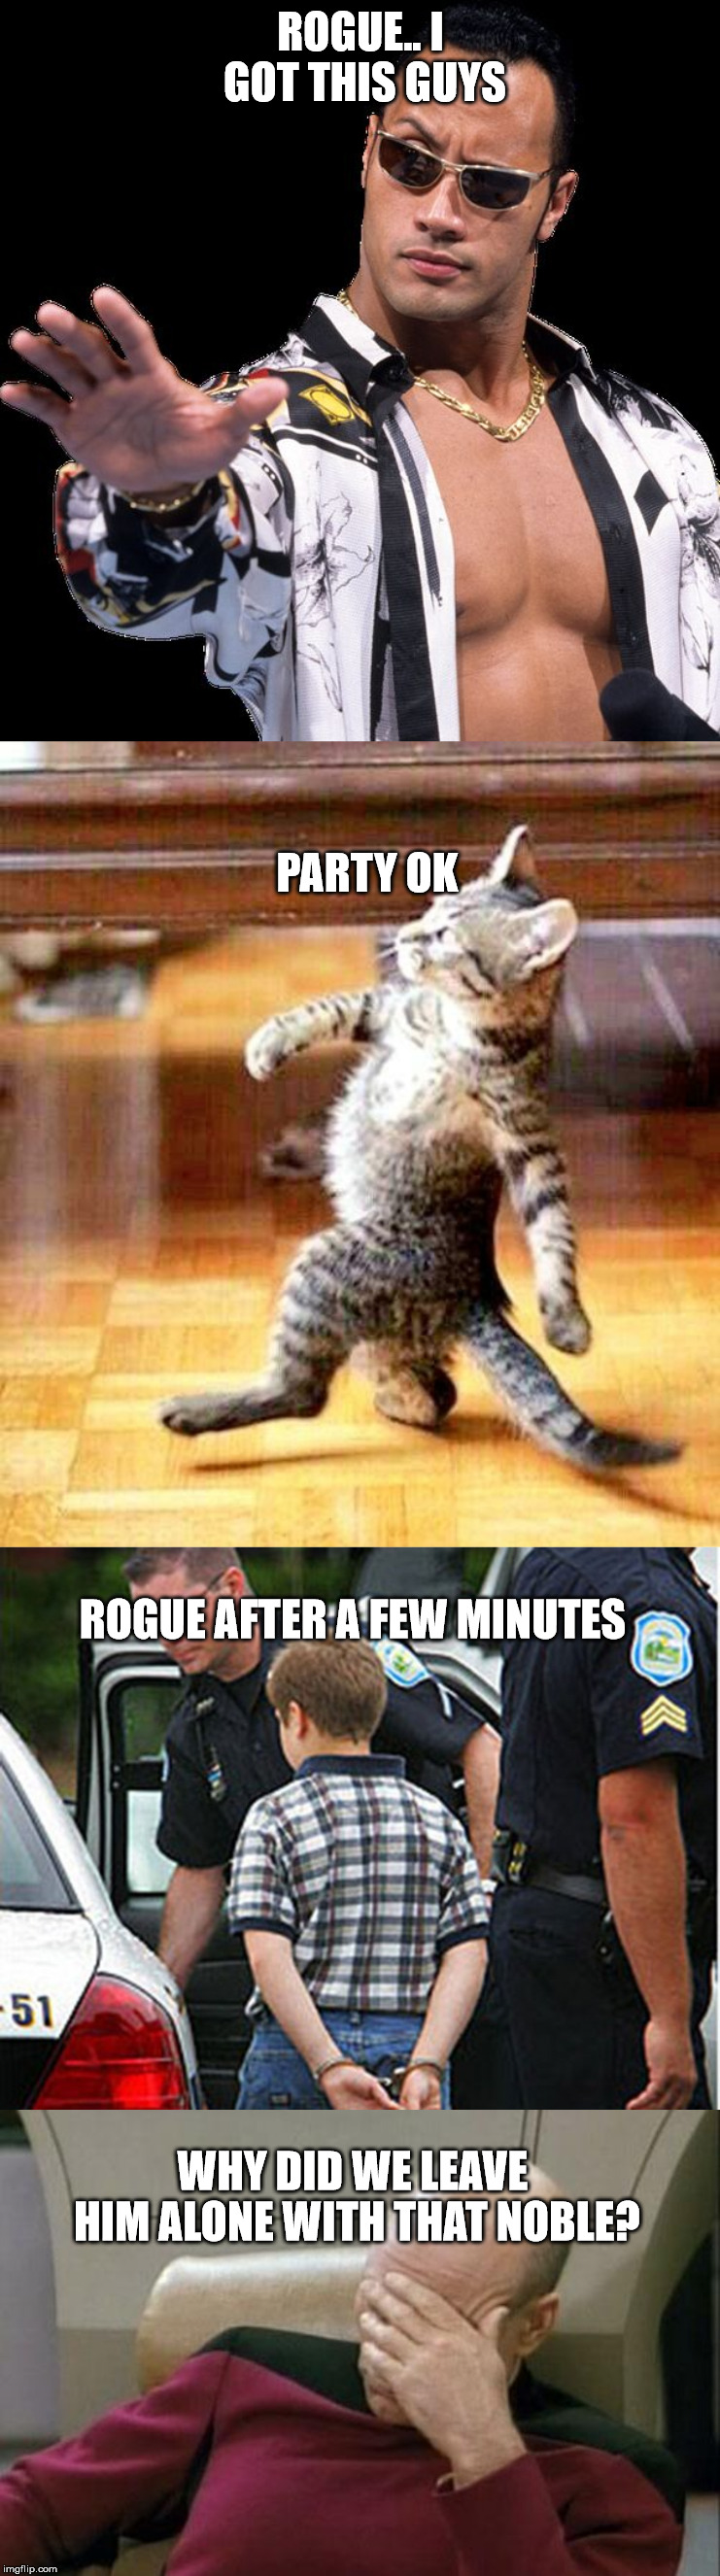 ROGUE.. I GOT THIS GUYS; PARTY OK; ROGUE AFTER A FEW MINUTES; WHY DID WE LEAVE HIM ALONE WITH THAT NOBLE? | image tagged in memes,captain picard facepalm,boy arrested for farting in school,cat walking away,cocky rock | made w/ Imgflip meme maker